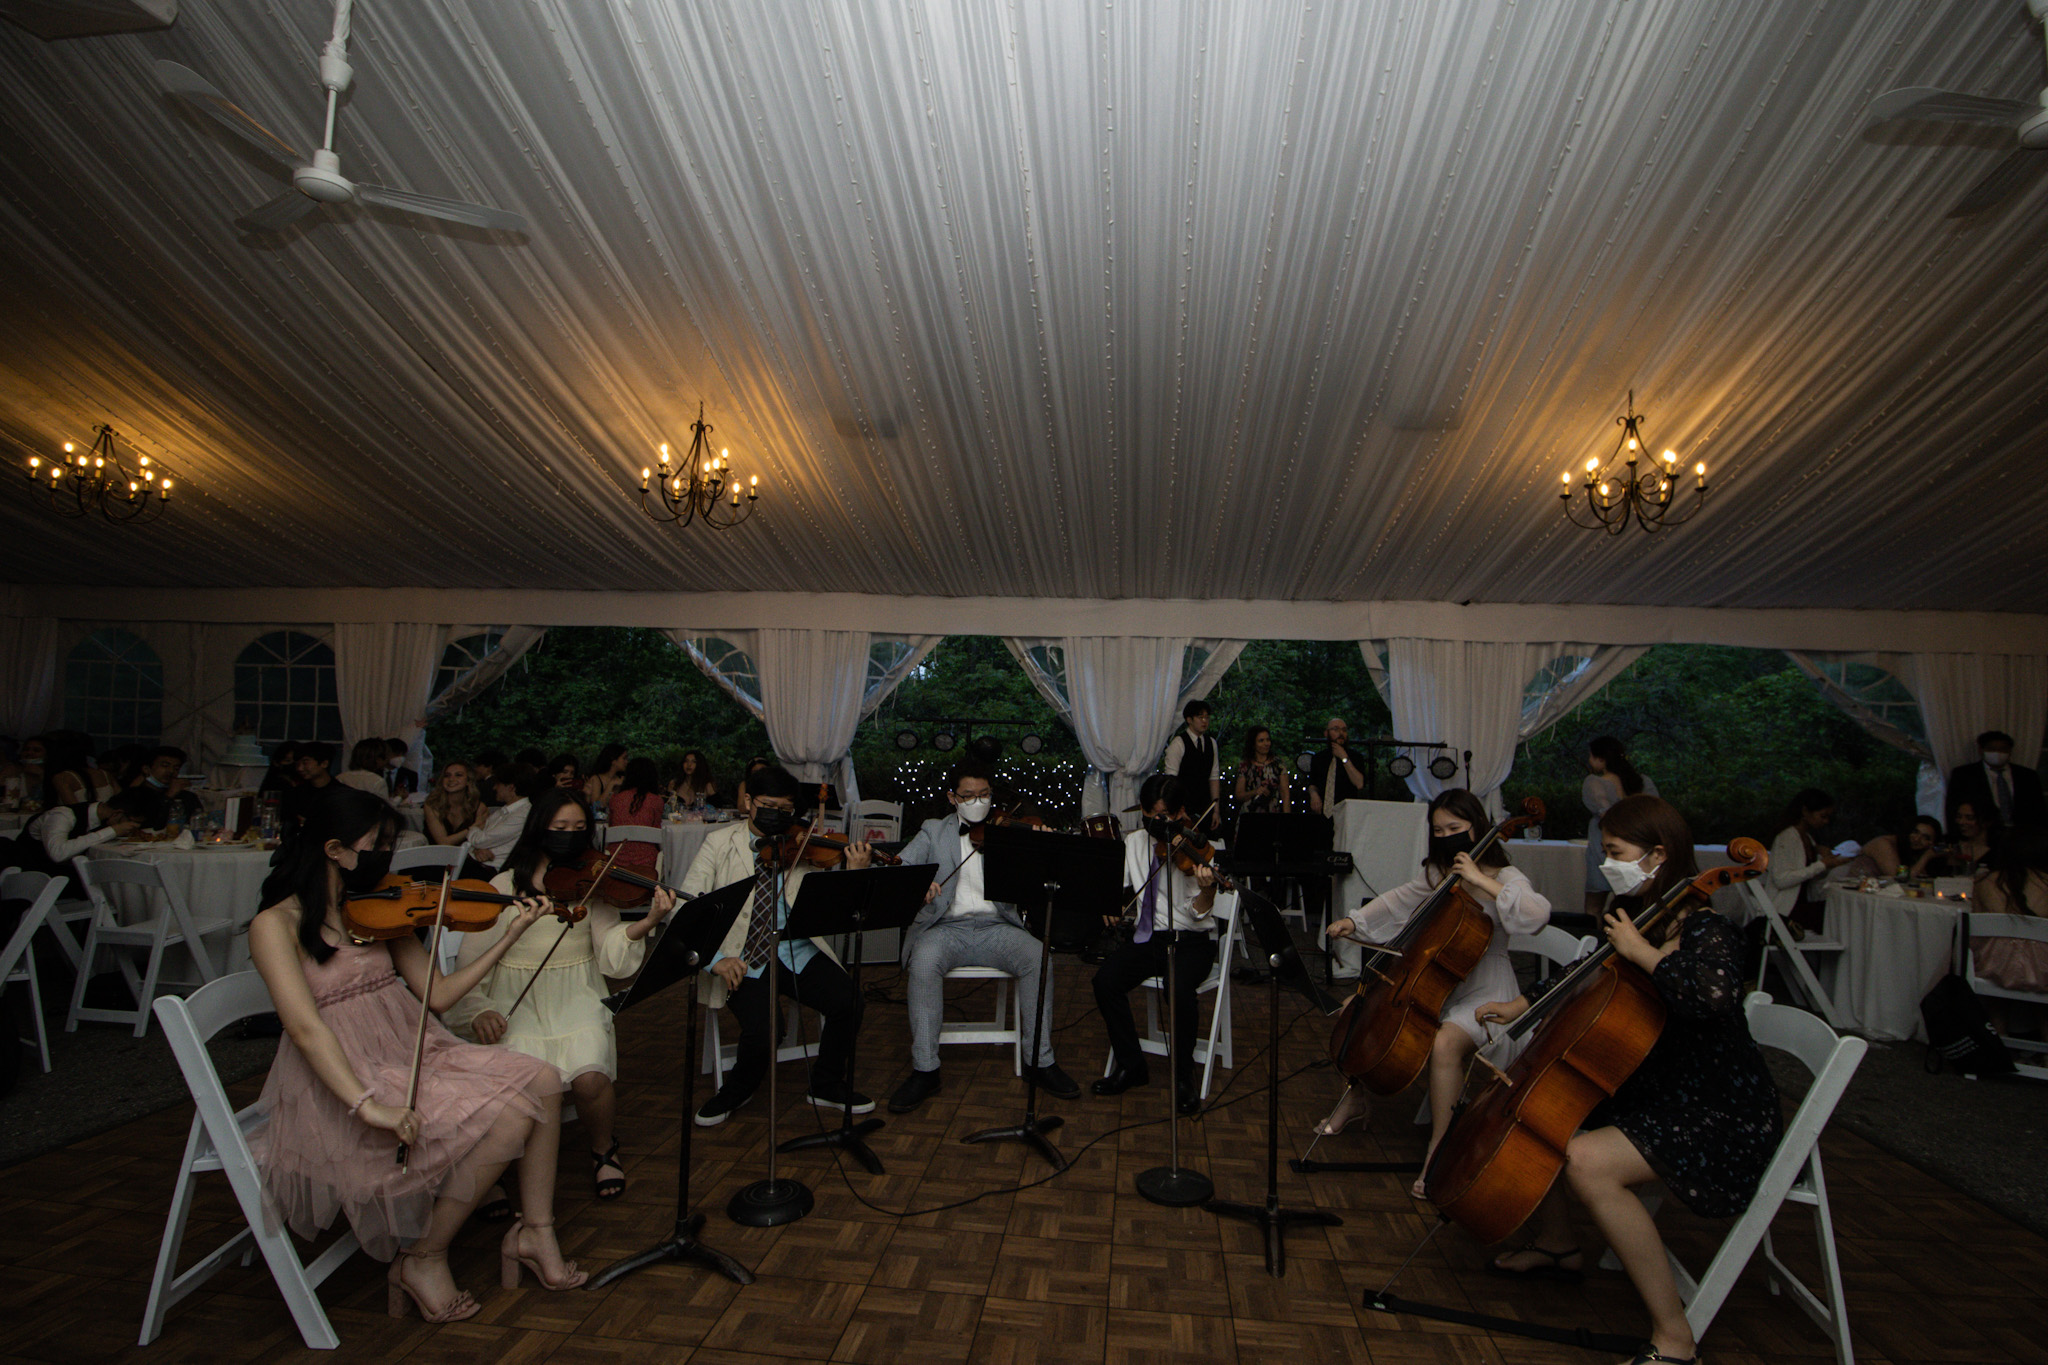 7 students playing strings instruments at an event. 